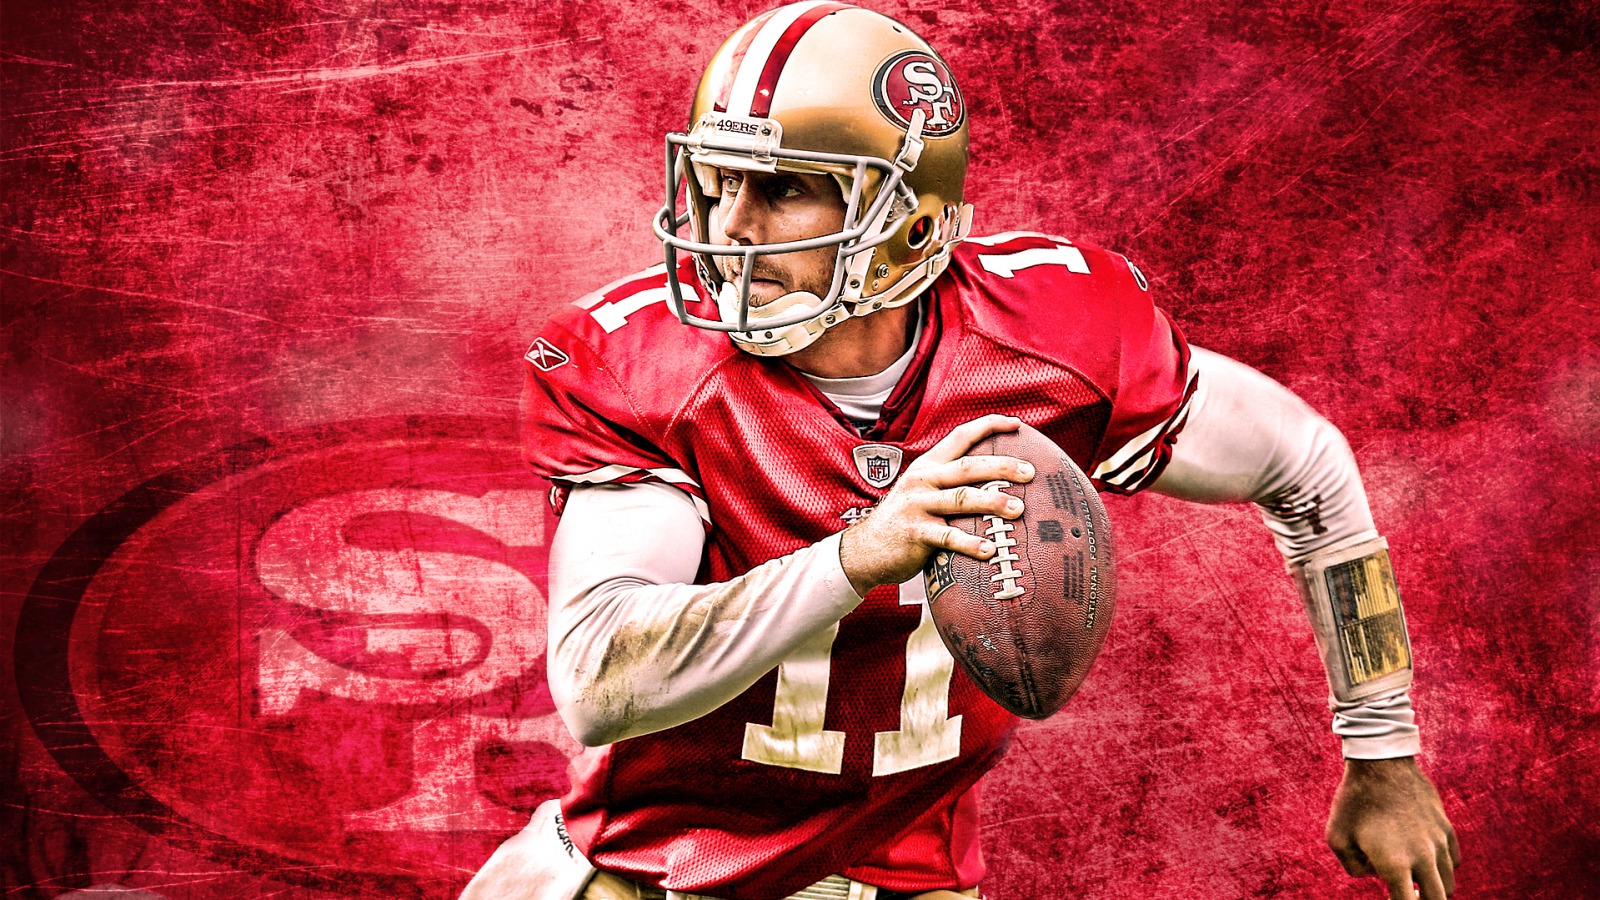 Wallpaper Of The Day San Francisco 49ers